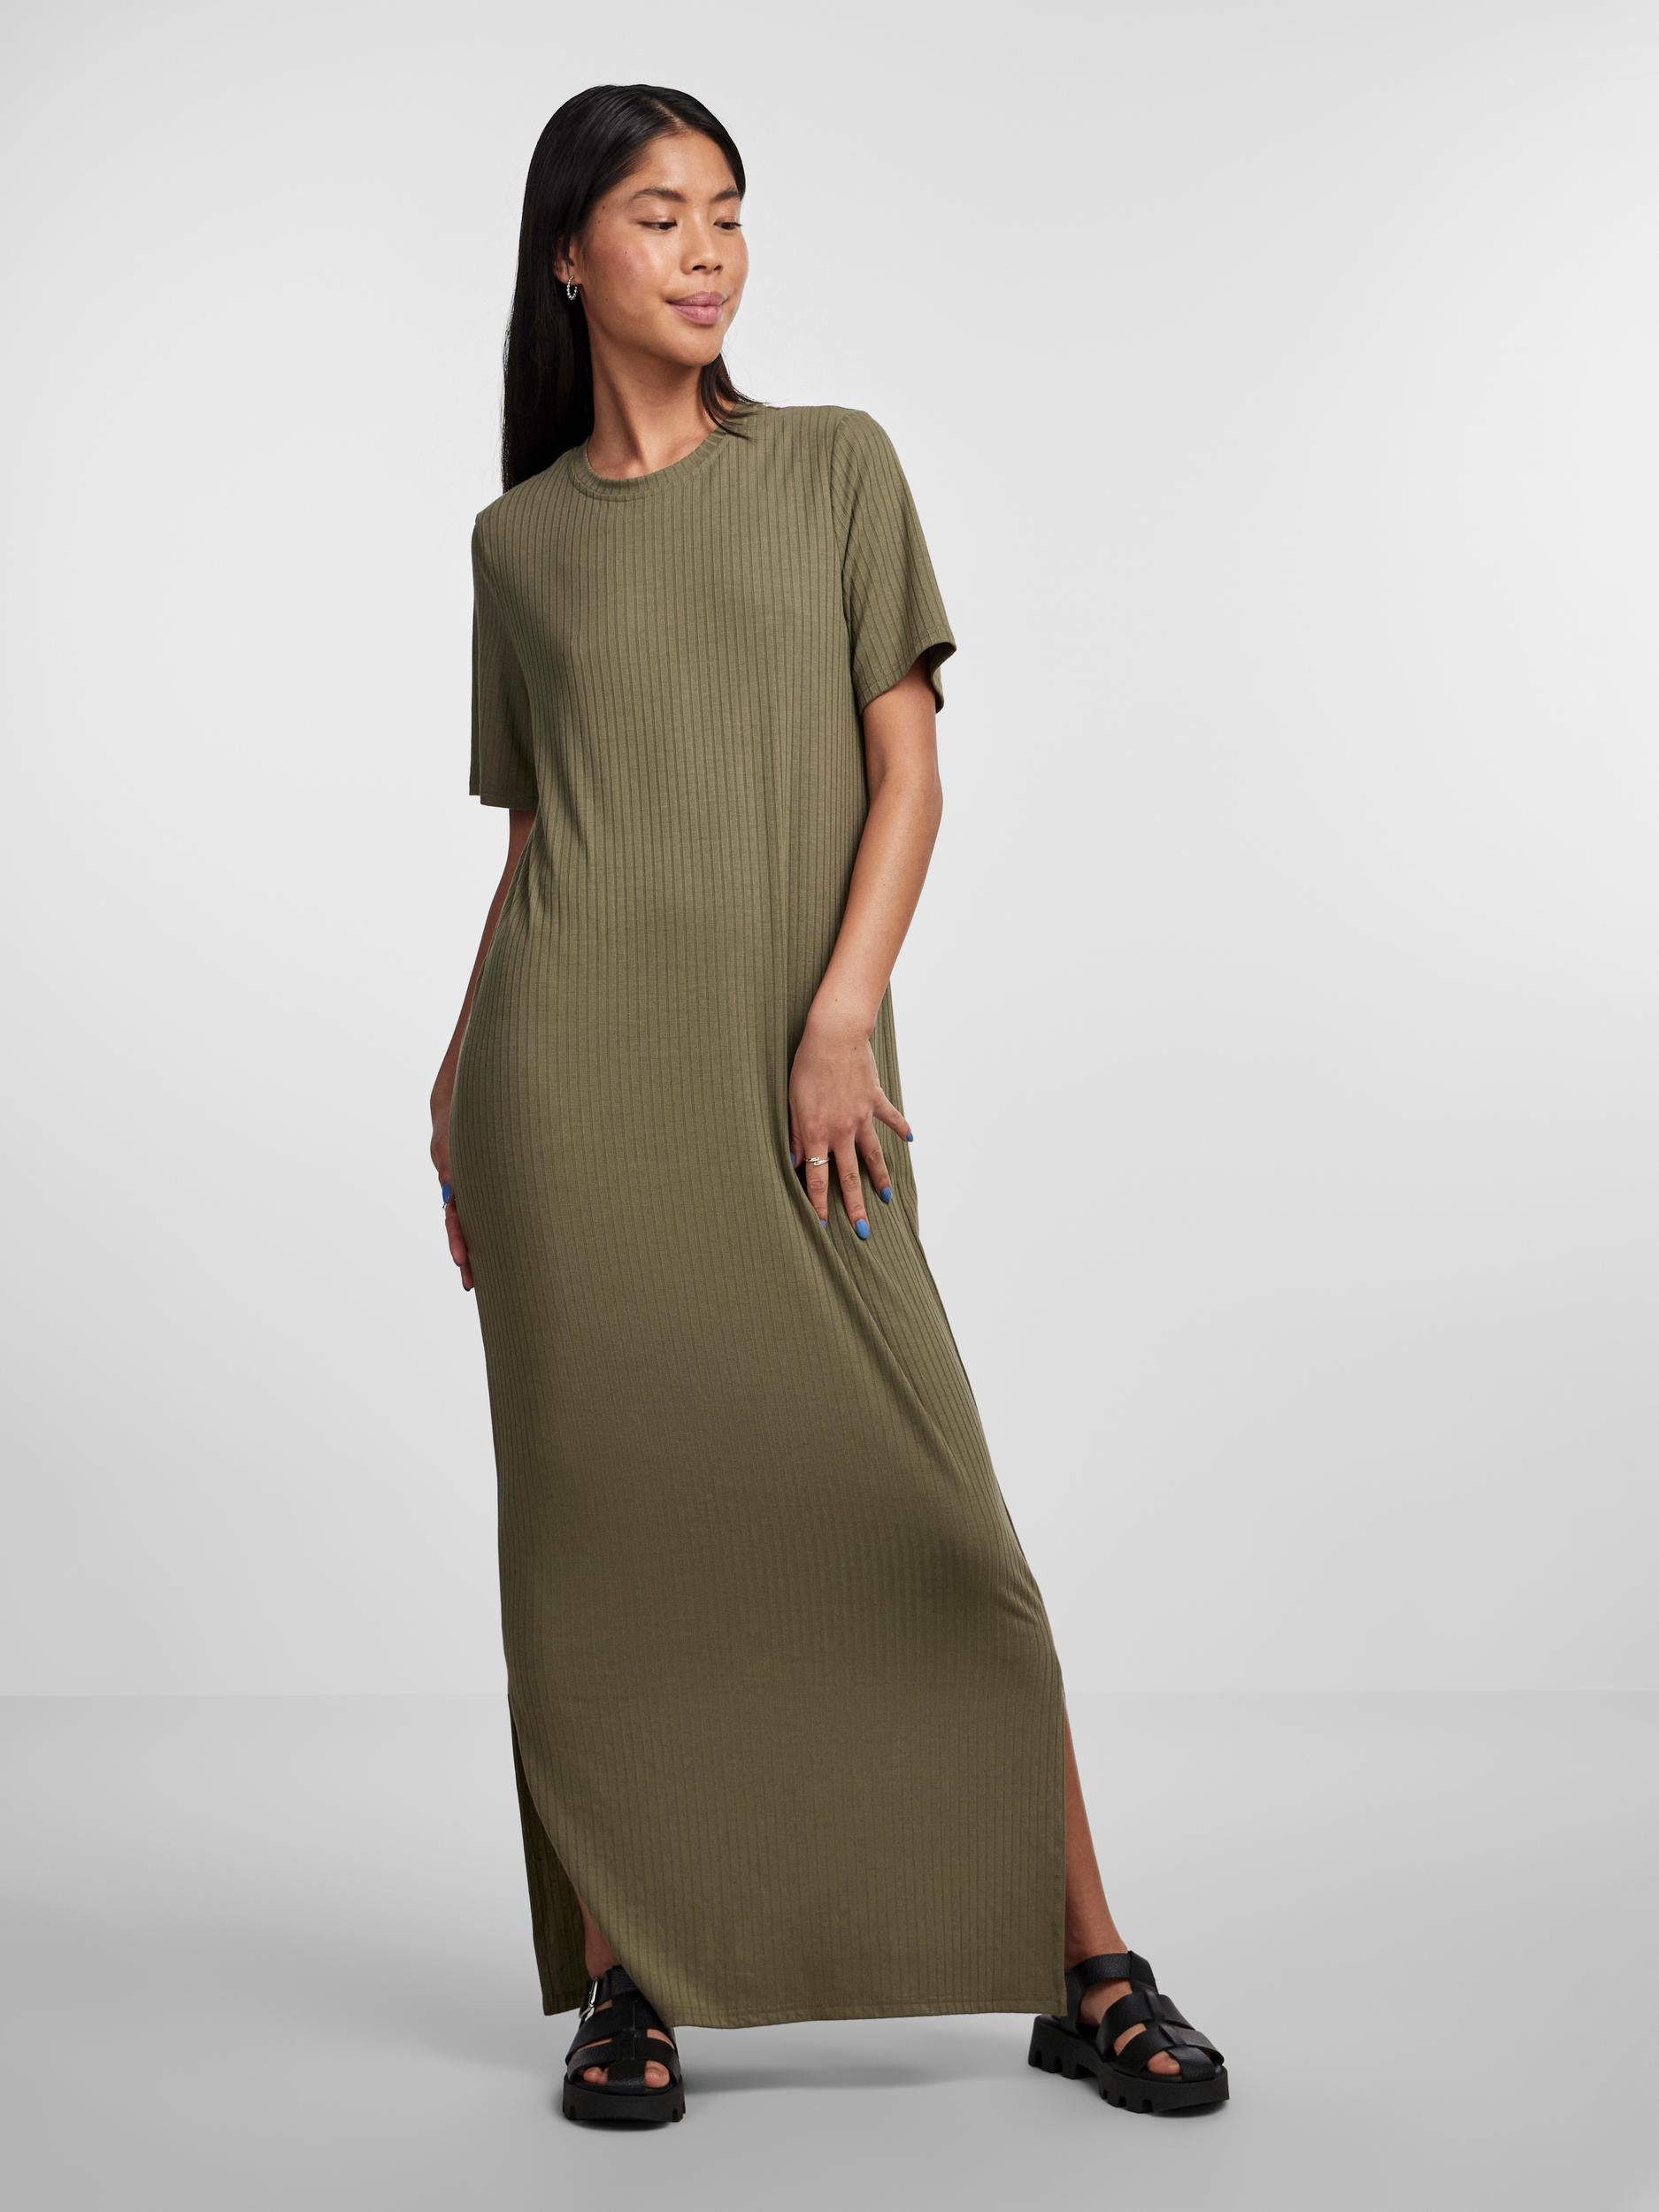 Pieces Kylie Ankle Dress - Army